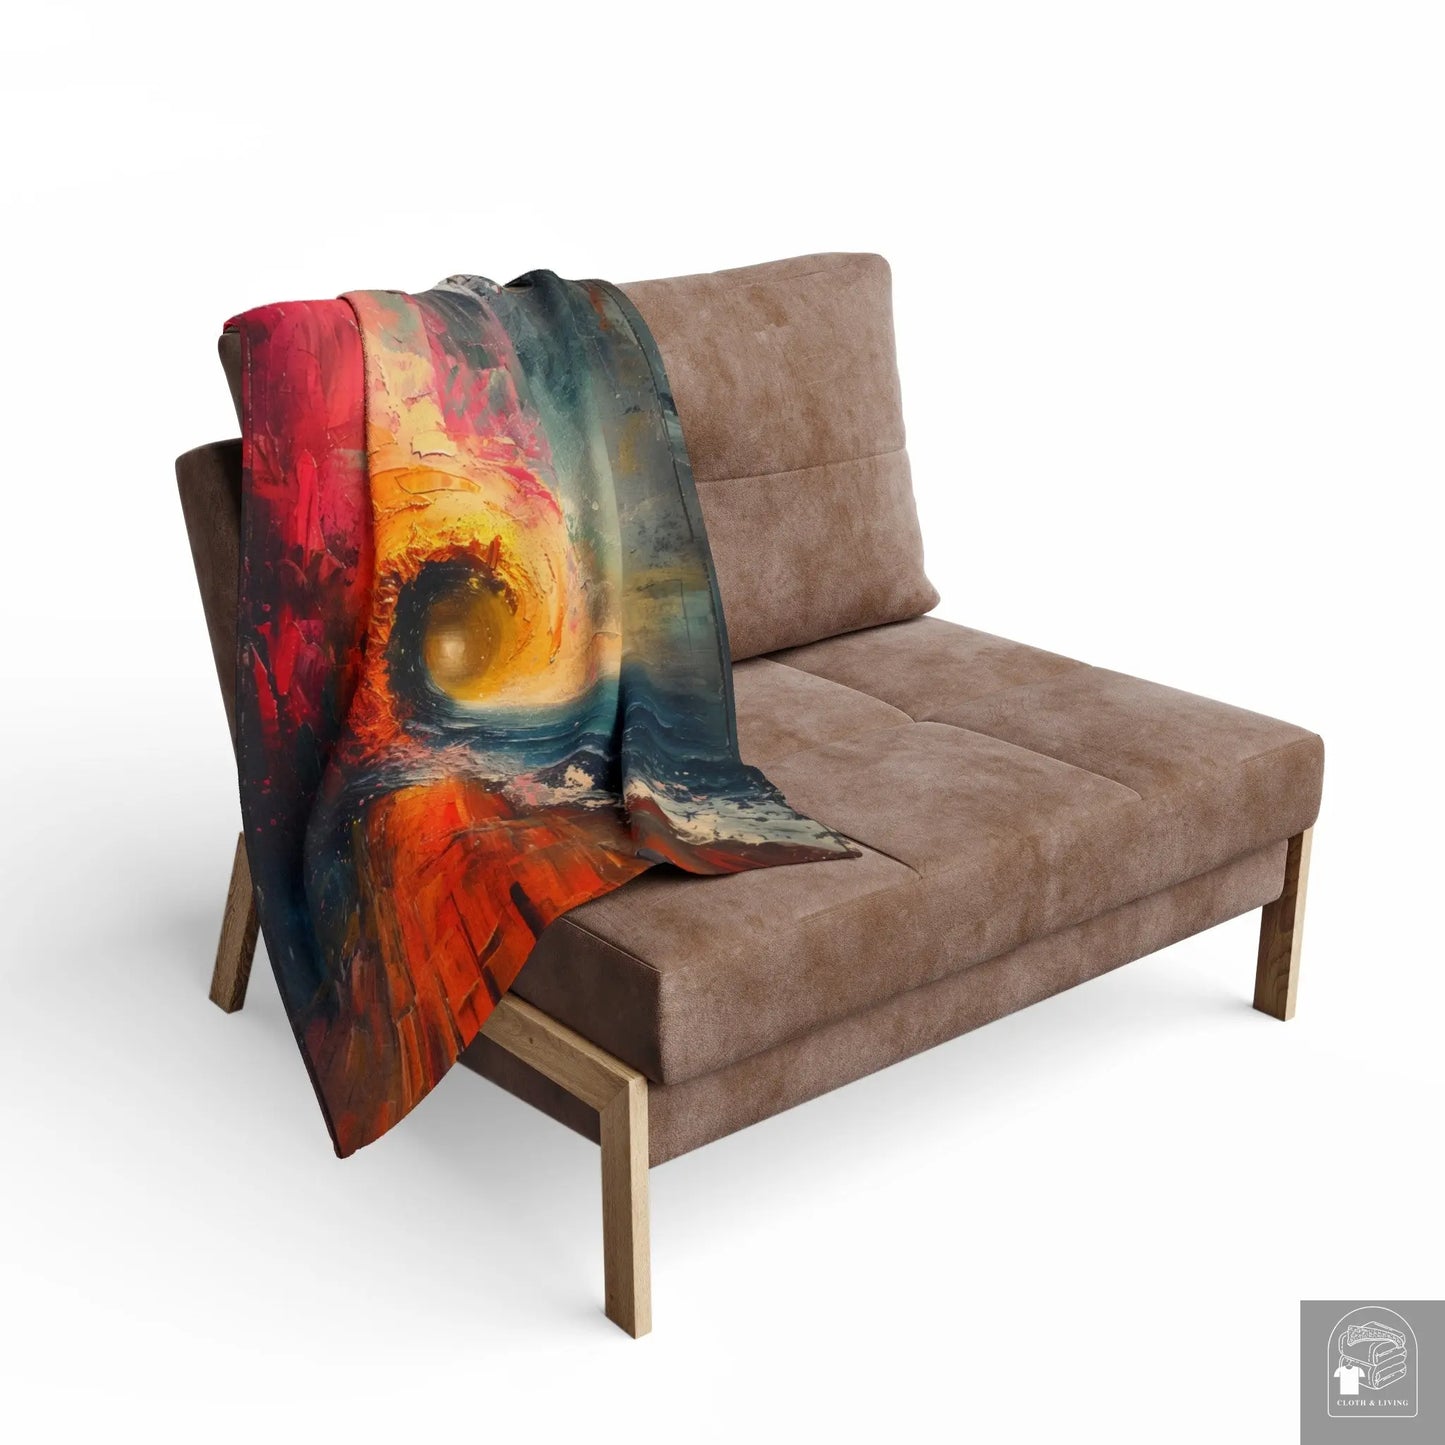 Horizon of Dreams - Arctic Fleece Blanket (Available in 3 sizes) -   Cloth & Living